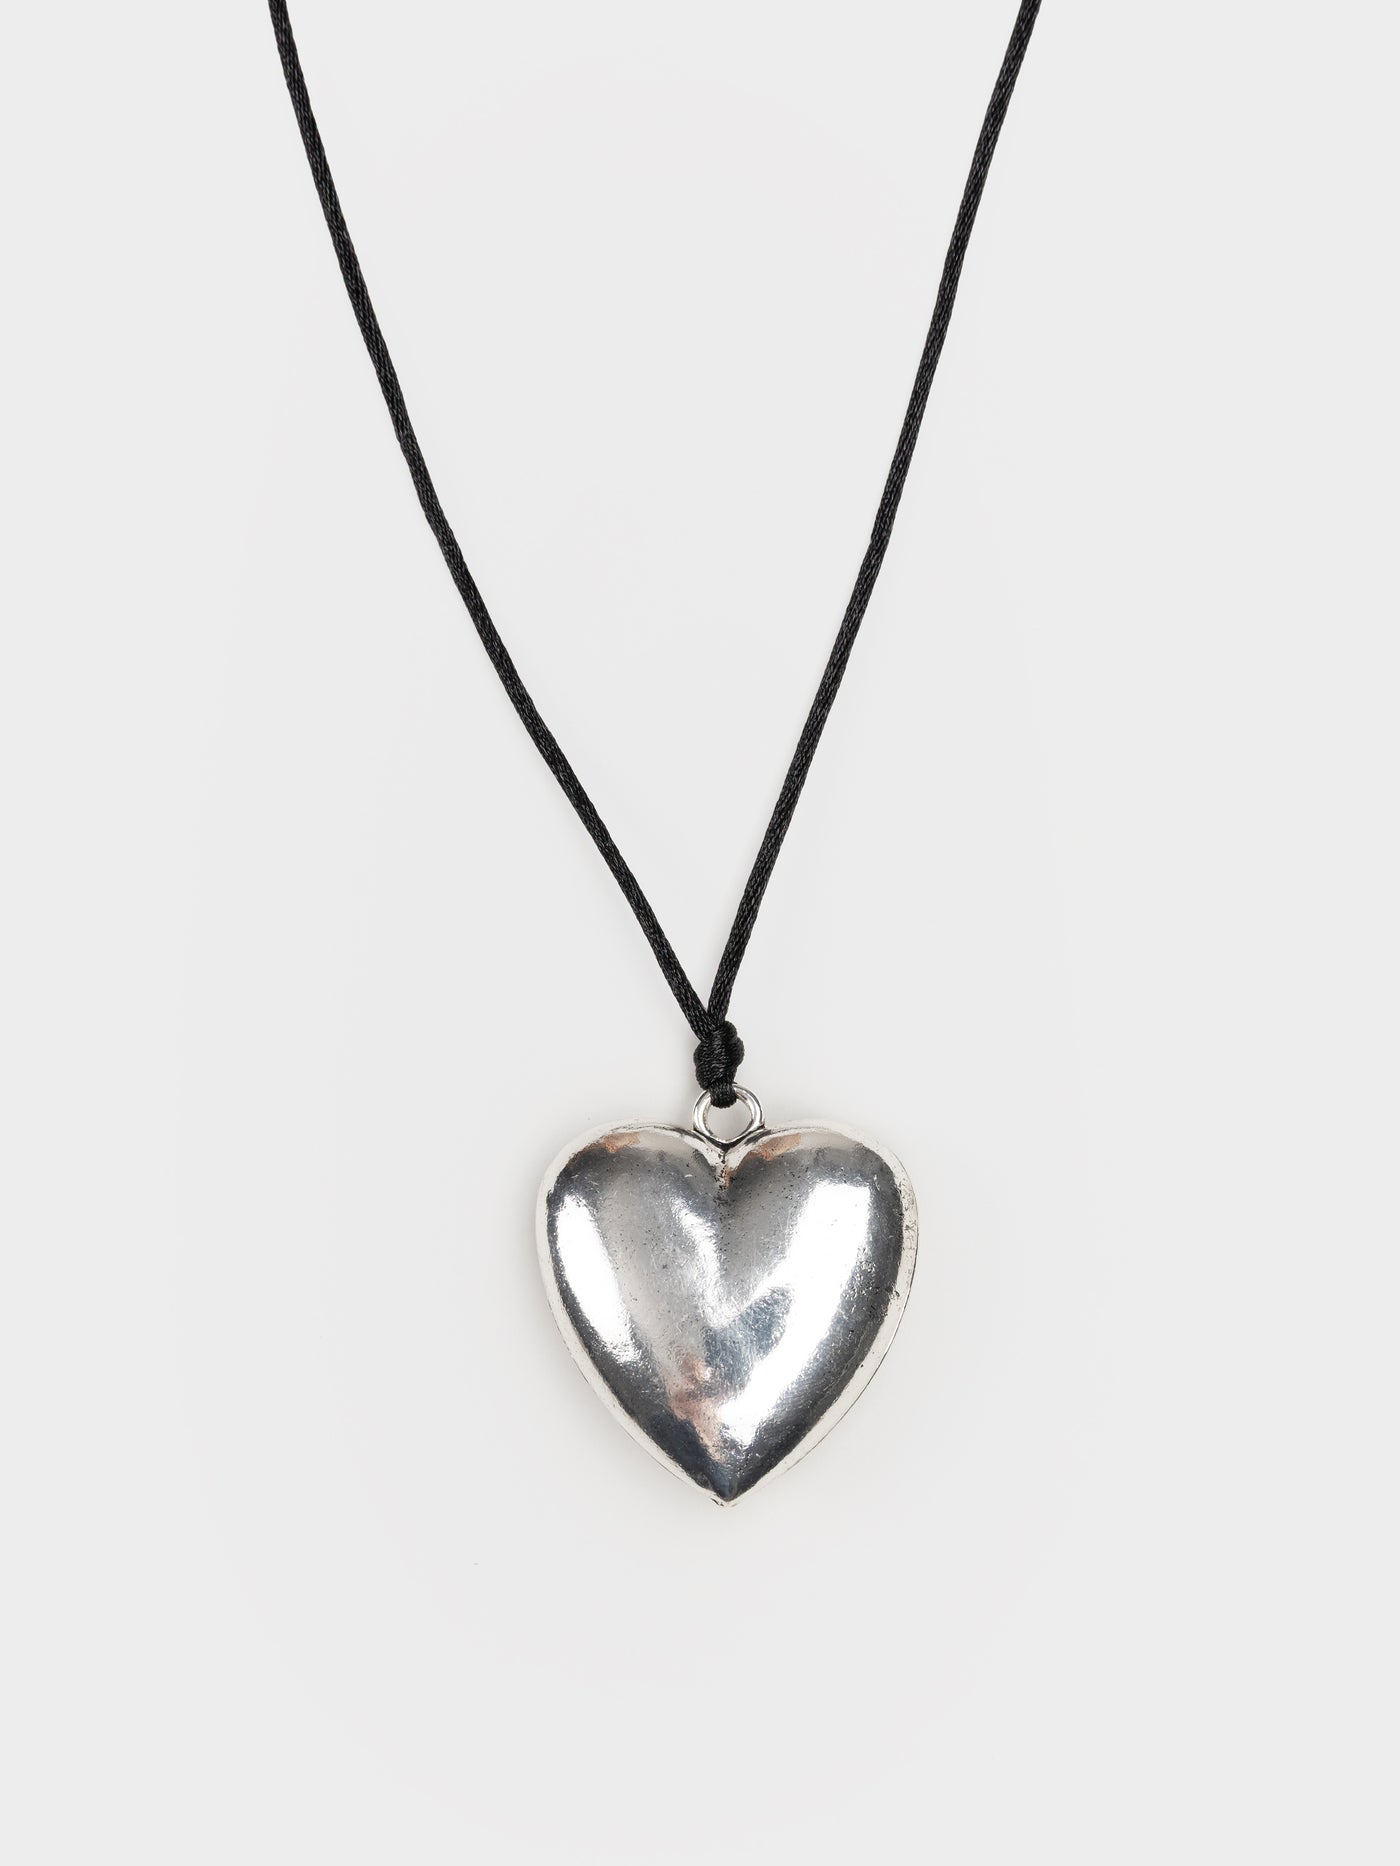 A grunge-inspired silver necklace with a captivating heart pendant, embodying a rebellious and edgy style.